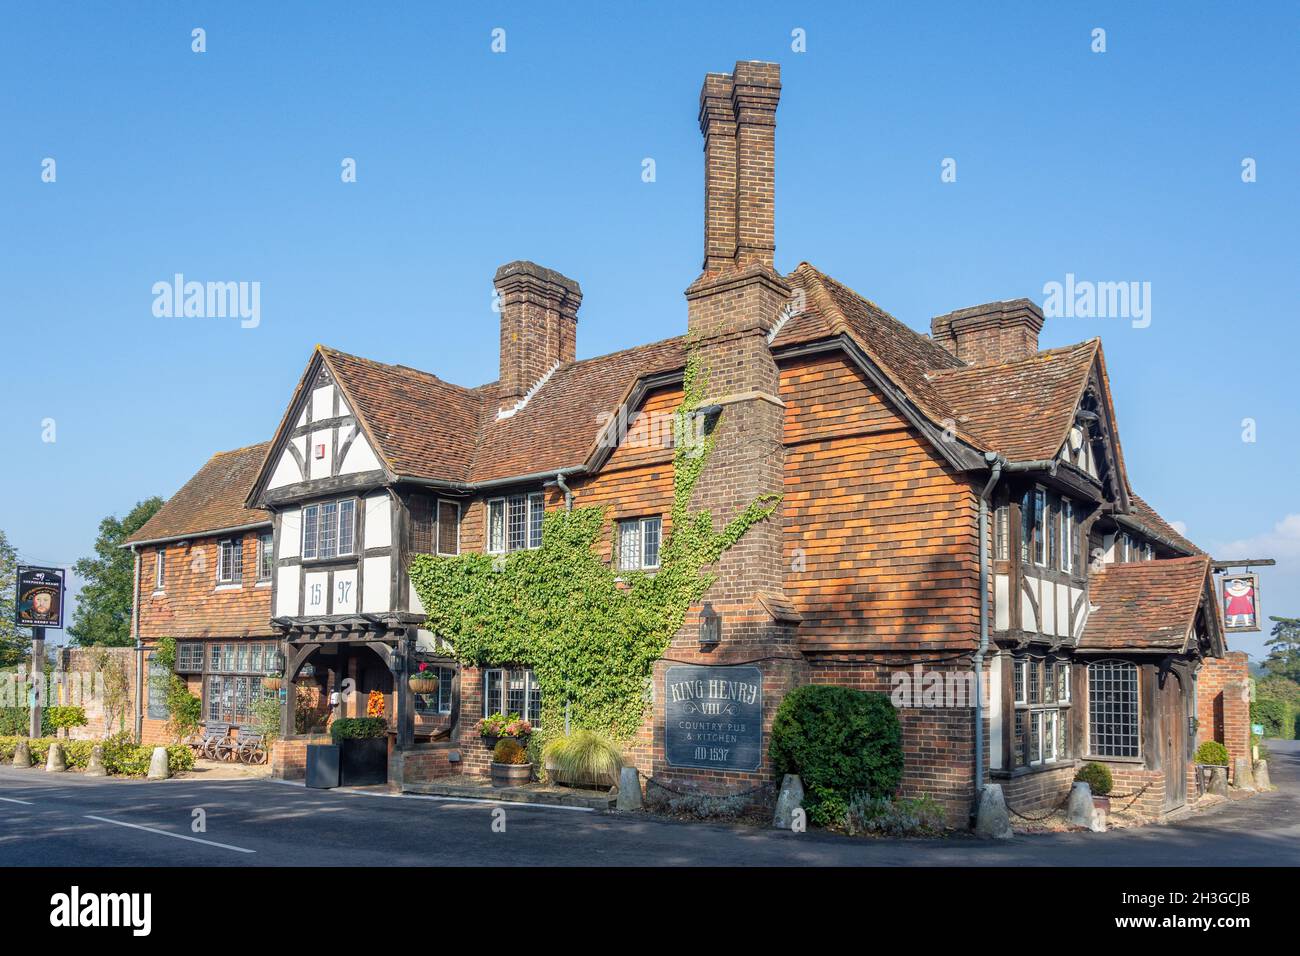 King Henry VIII Country pub & Kitchen, Hever Road, Hever, Kent, Angleterre,Royaume-Uni Banque D'Images